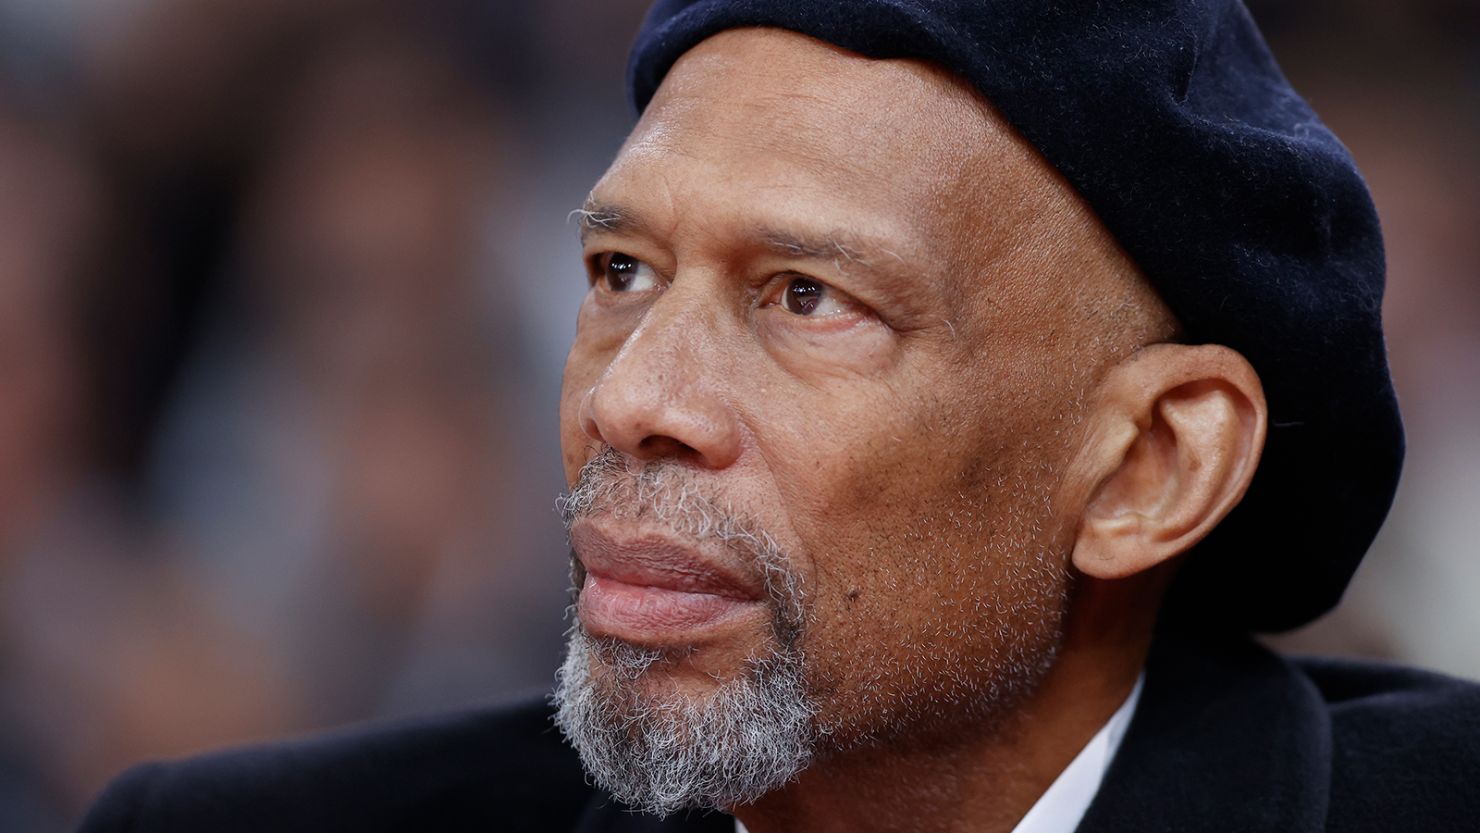 PARIS, FRANCE - JANUARY 24: A close up shot of NBA Legend, Kareem Abdul-Jabbar during the Milwaukee Bucks game against the Charlotte Hornets as part of NBA Paris Games 2020 on January 24, 2020 in Paris, France at the AccorHotels Arena. NOTE TO USER: User expressly acknowledges and agrees that, by downloading and/or using this Photograph, user is consenting to the terms and conditions of the Getty Images License Agreement. Mandatory Copyright Notice: Copyright 2020 NBAE (Photo by Catherine Steenkeste/NBAE via Getty Images)